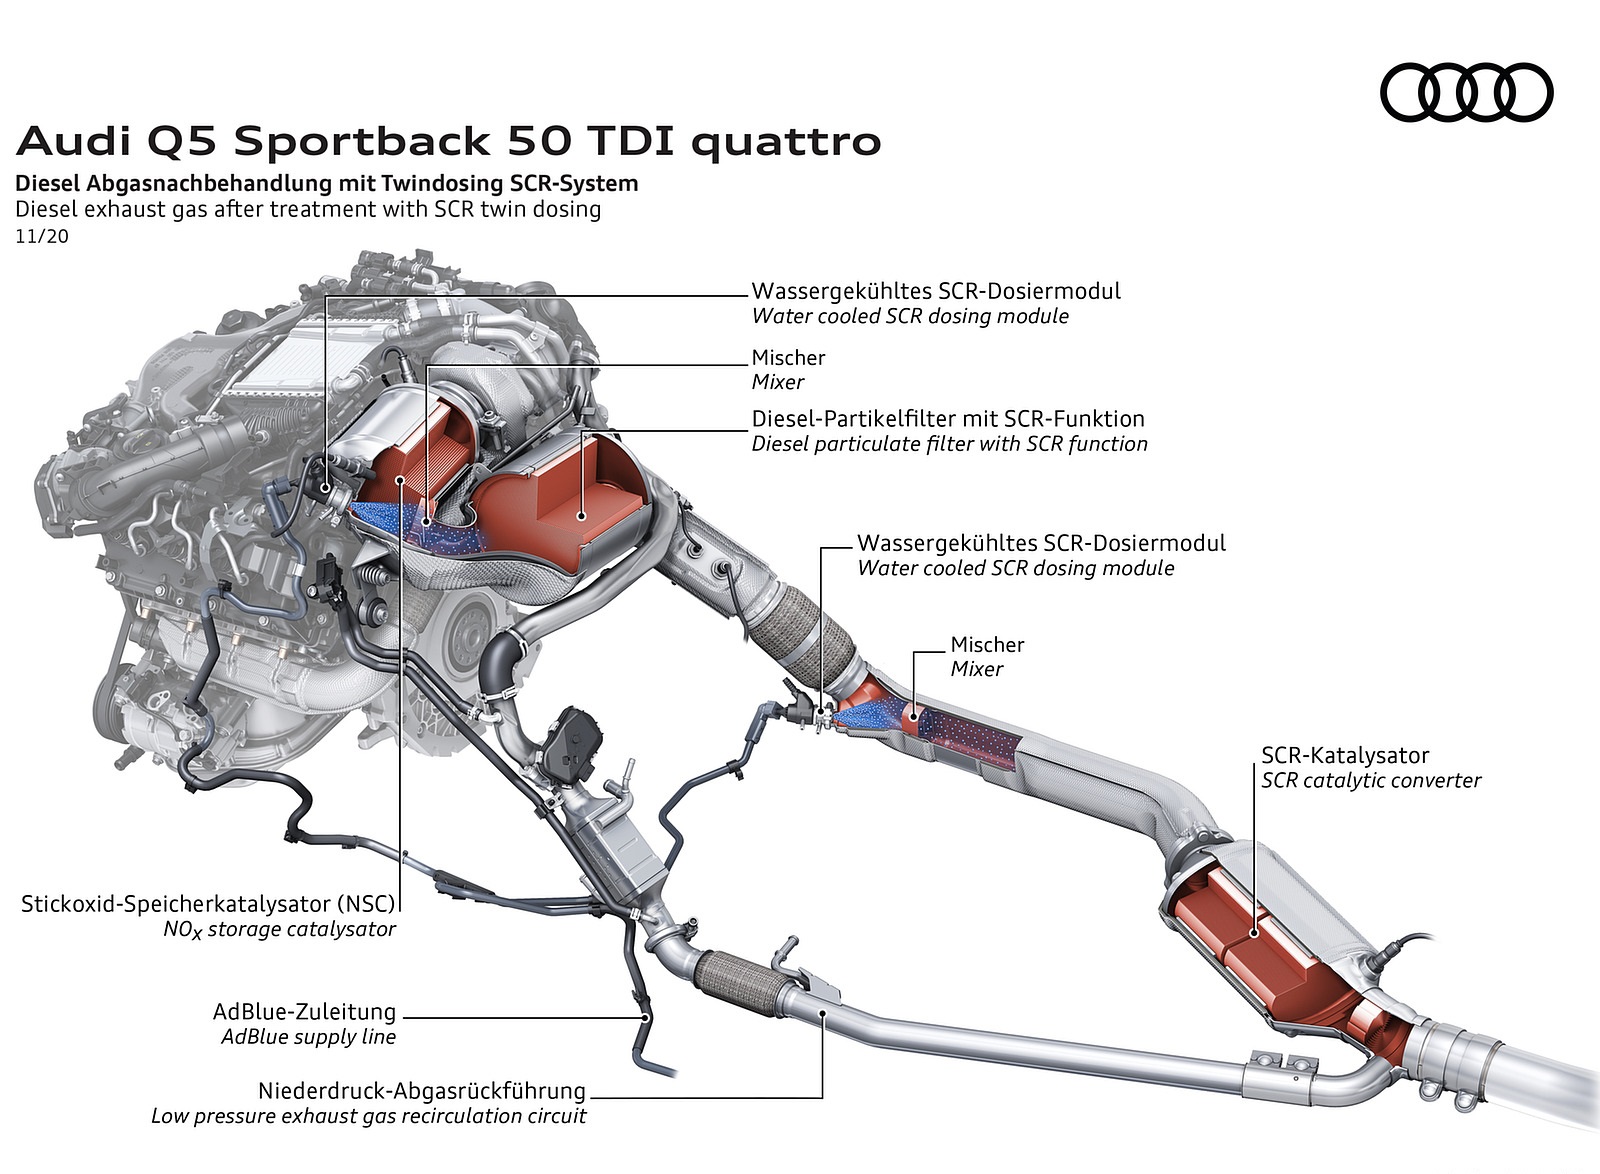 2021 Audi Q5 Sportback Diesel exhaust gas after treatment with SCR twin dosing Wallpapers  #122 of 158